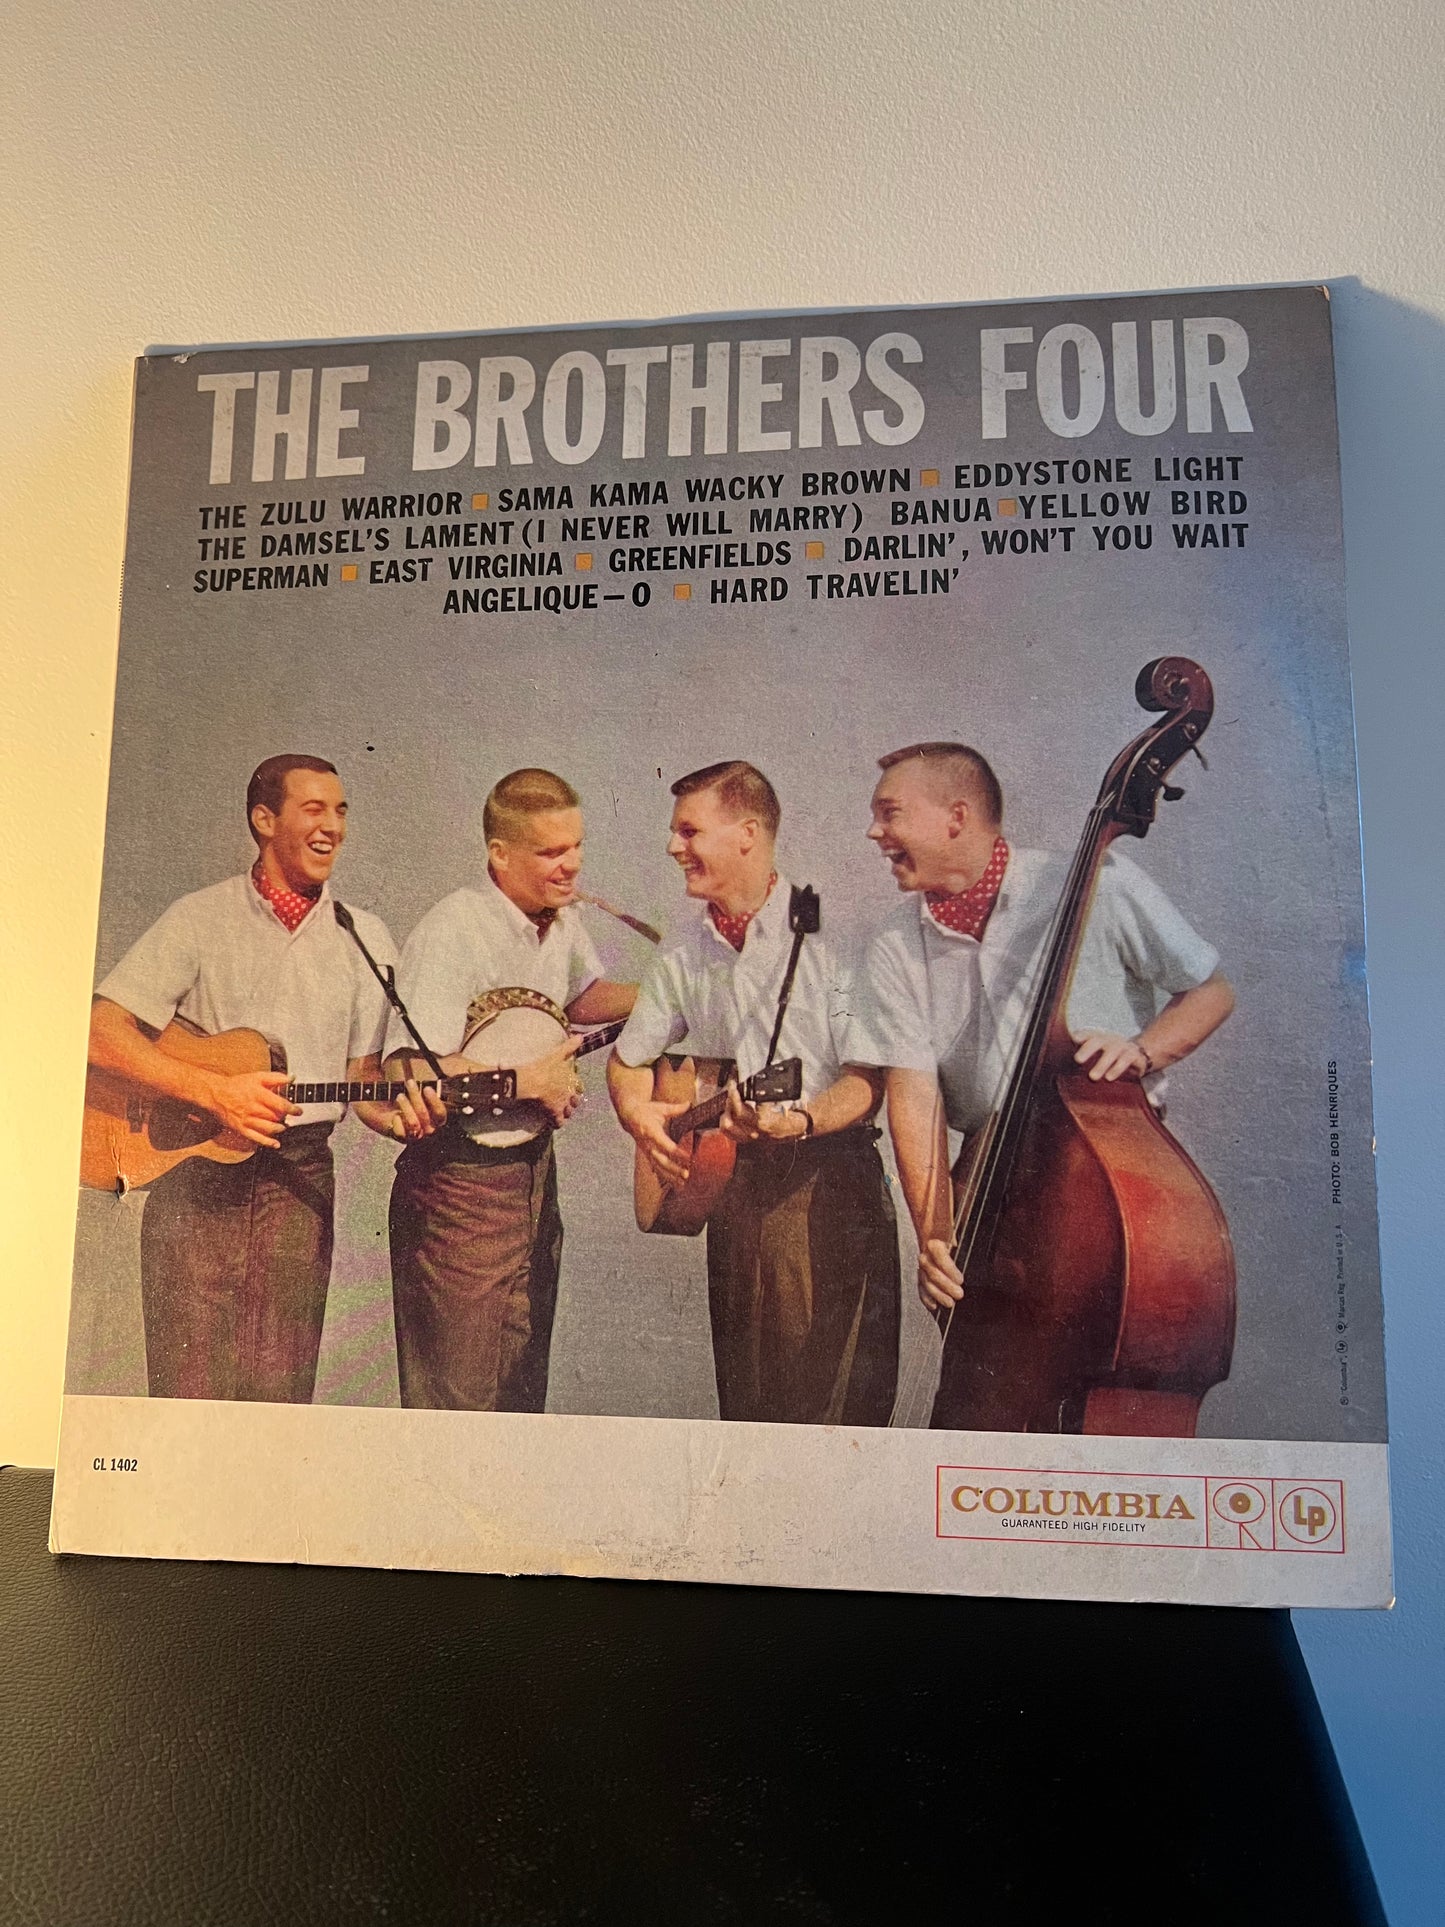 The Brothers Four Self Titled   Record Album Vinyl LP